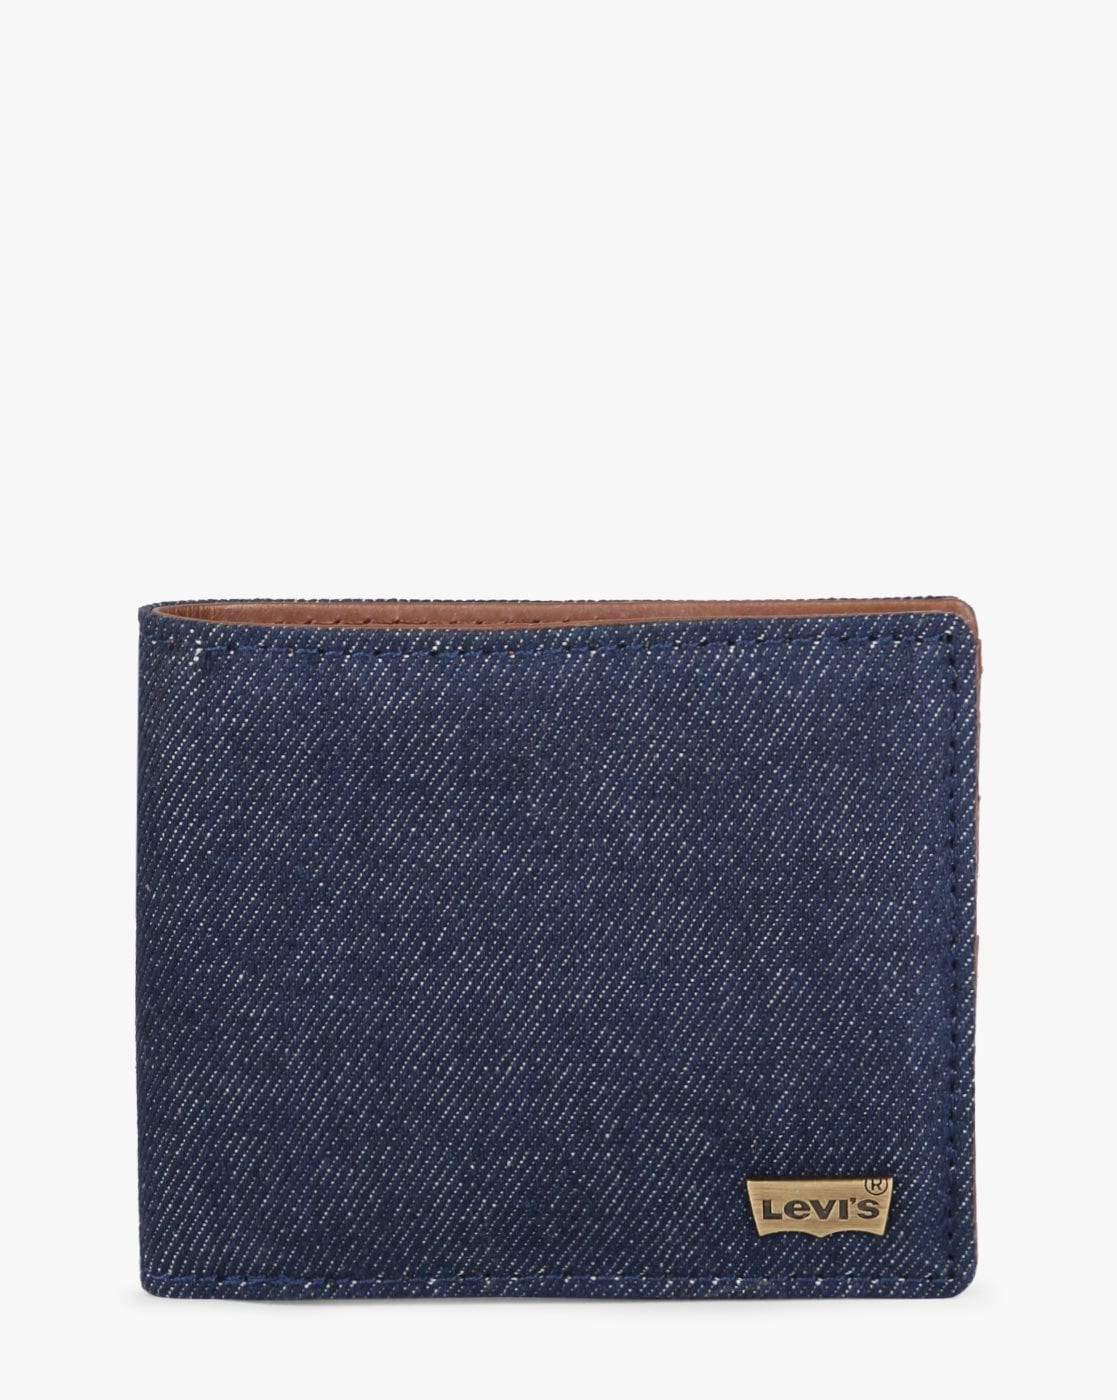 Stylish Levi's Brown Leather Wallet